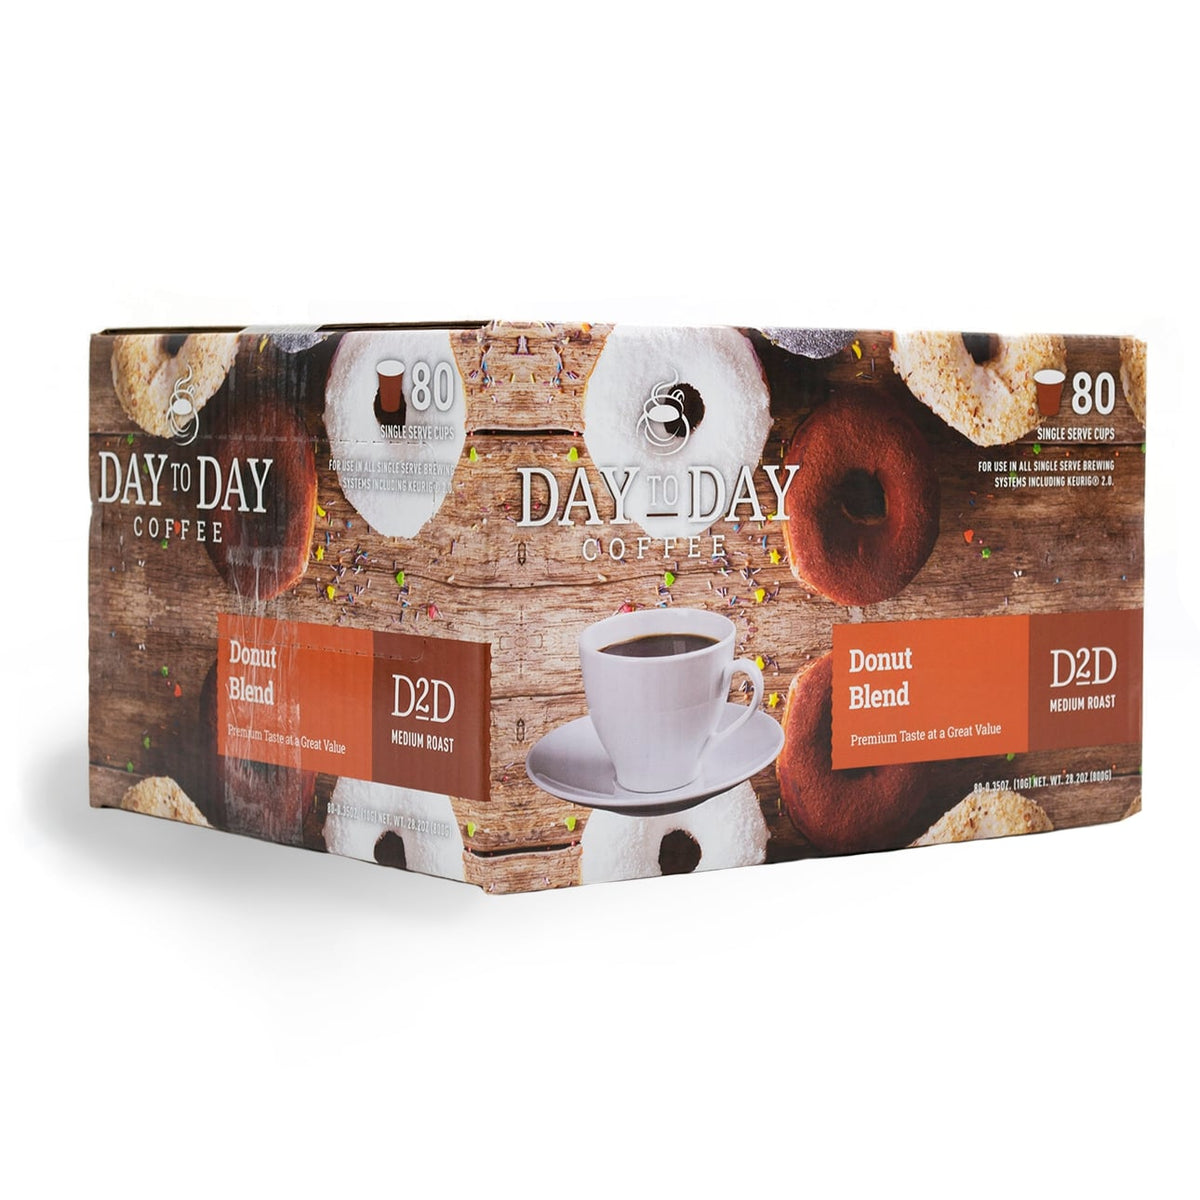 Day to day coffee 80 donut blend medium roast coffee pods for single serve coffee brewer